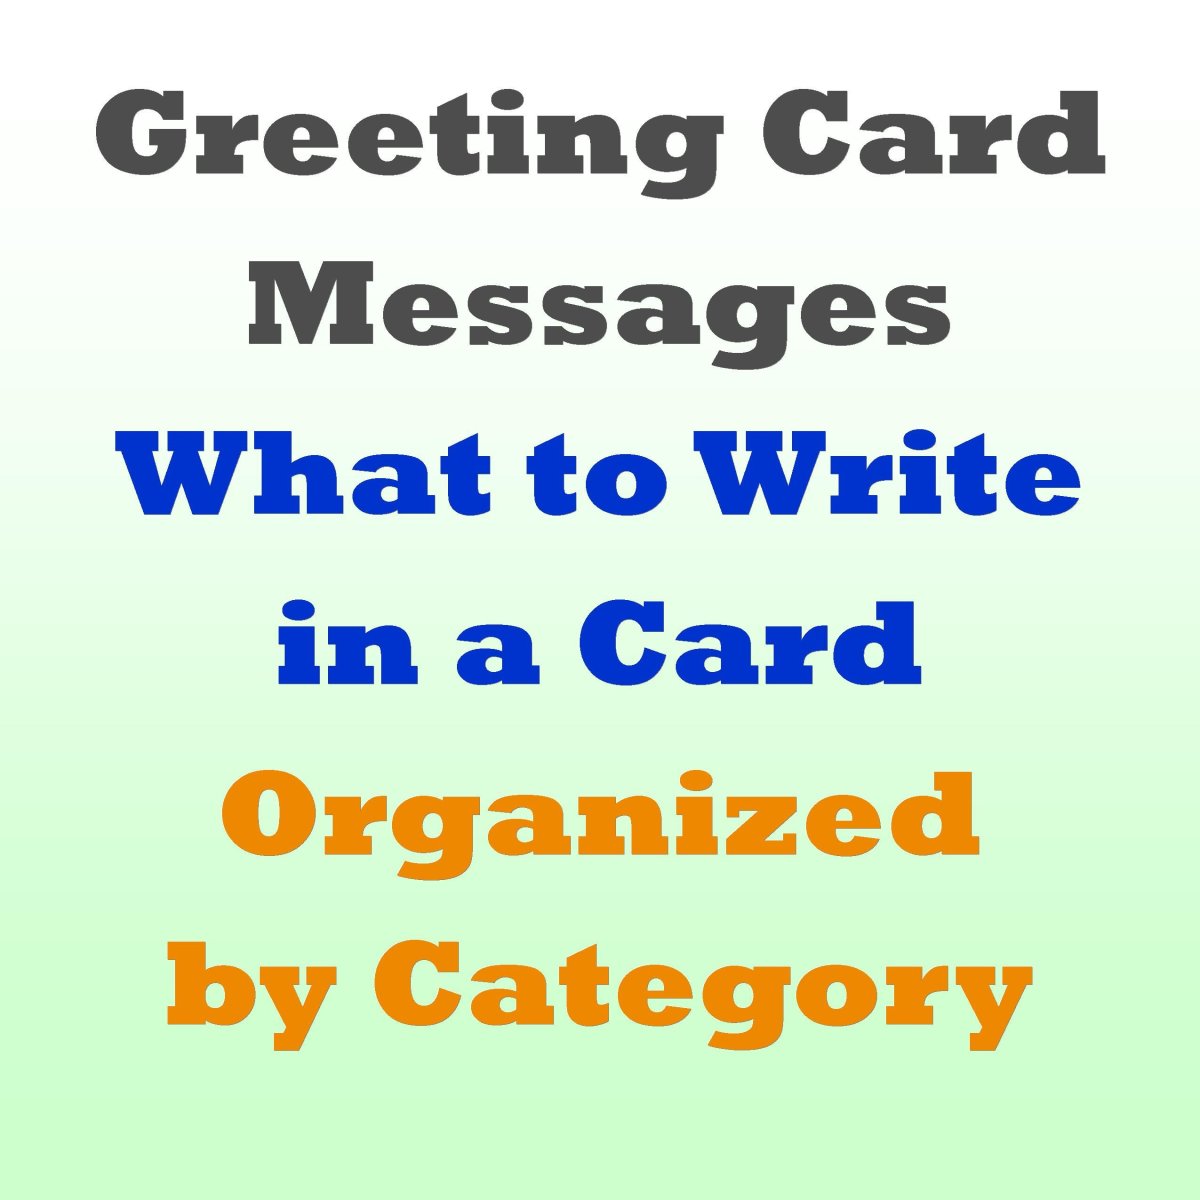 Greeting Card Messages: Examples of What to Write